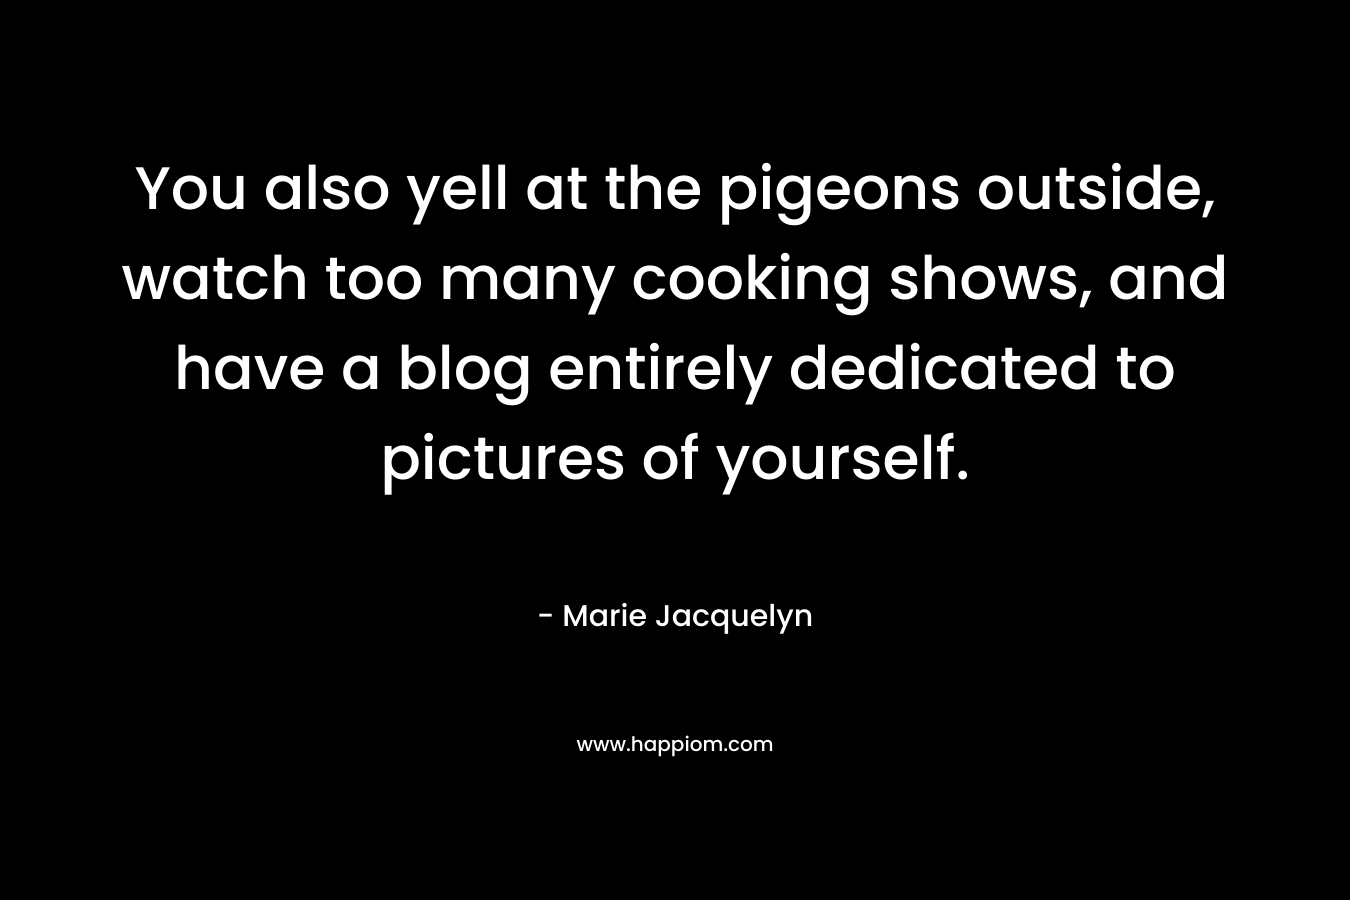 You also yell at the pigeons outside, watch too many cooking shows, and have a blog entirely dedicated to pictures of yourself.